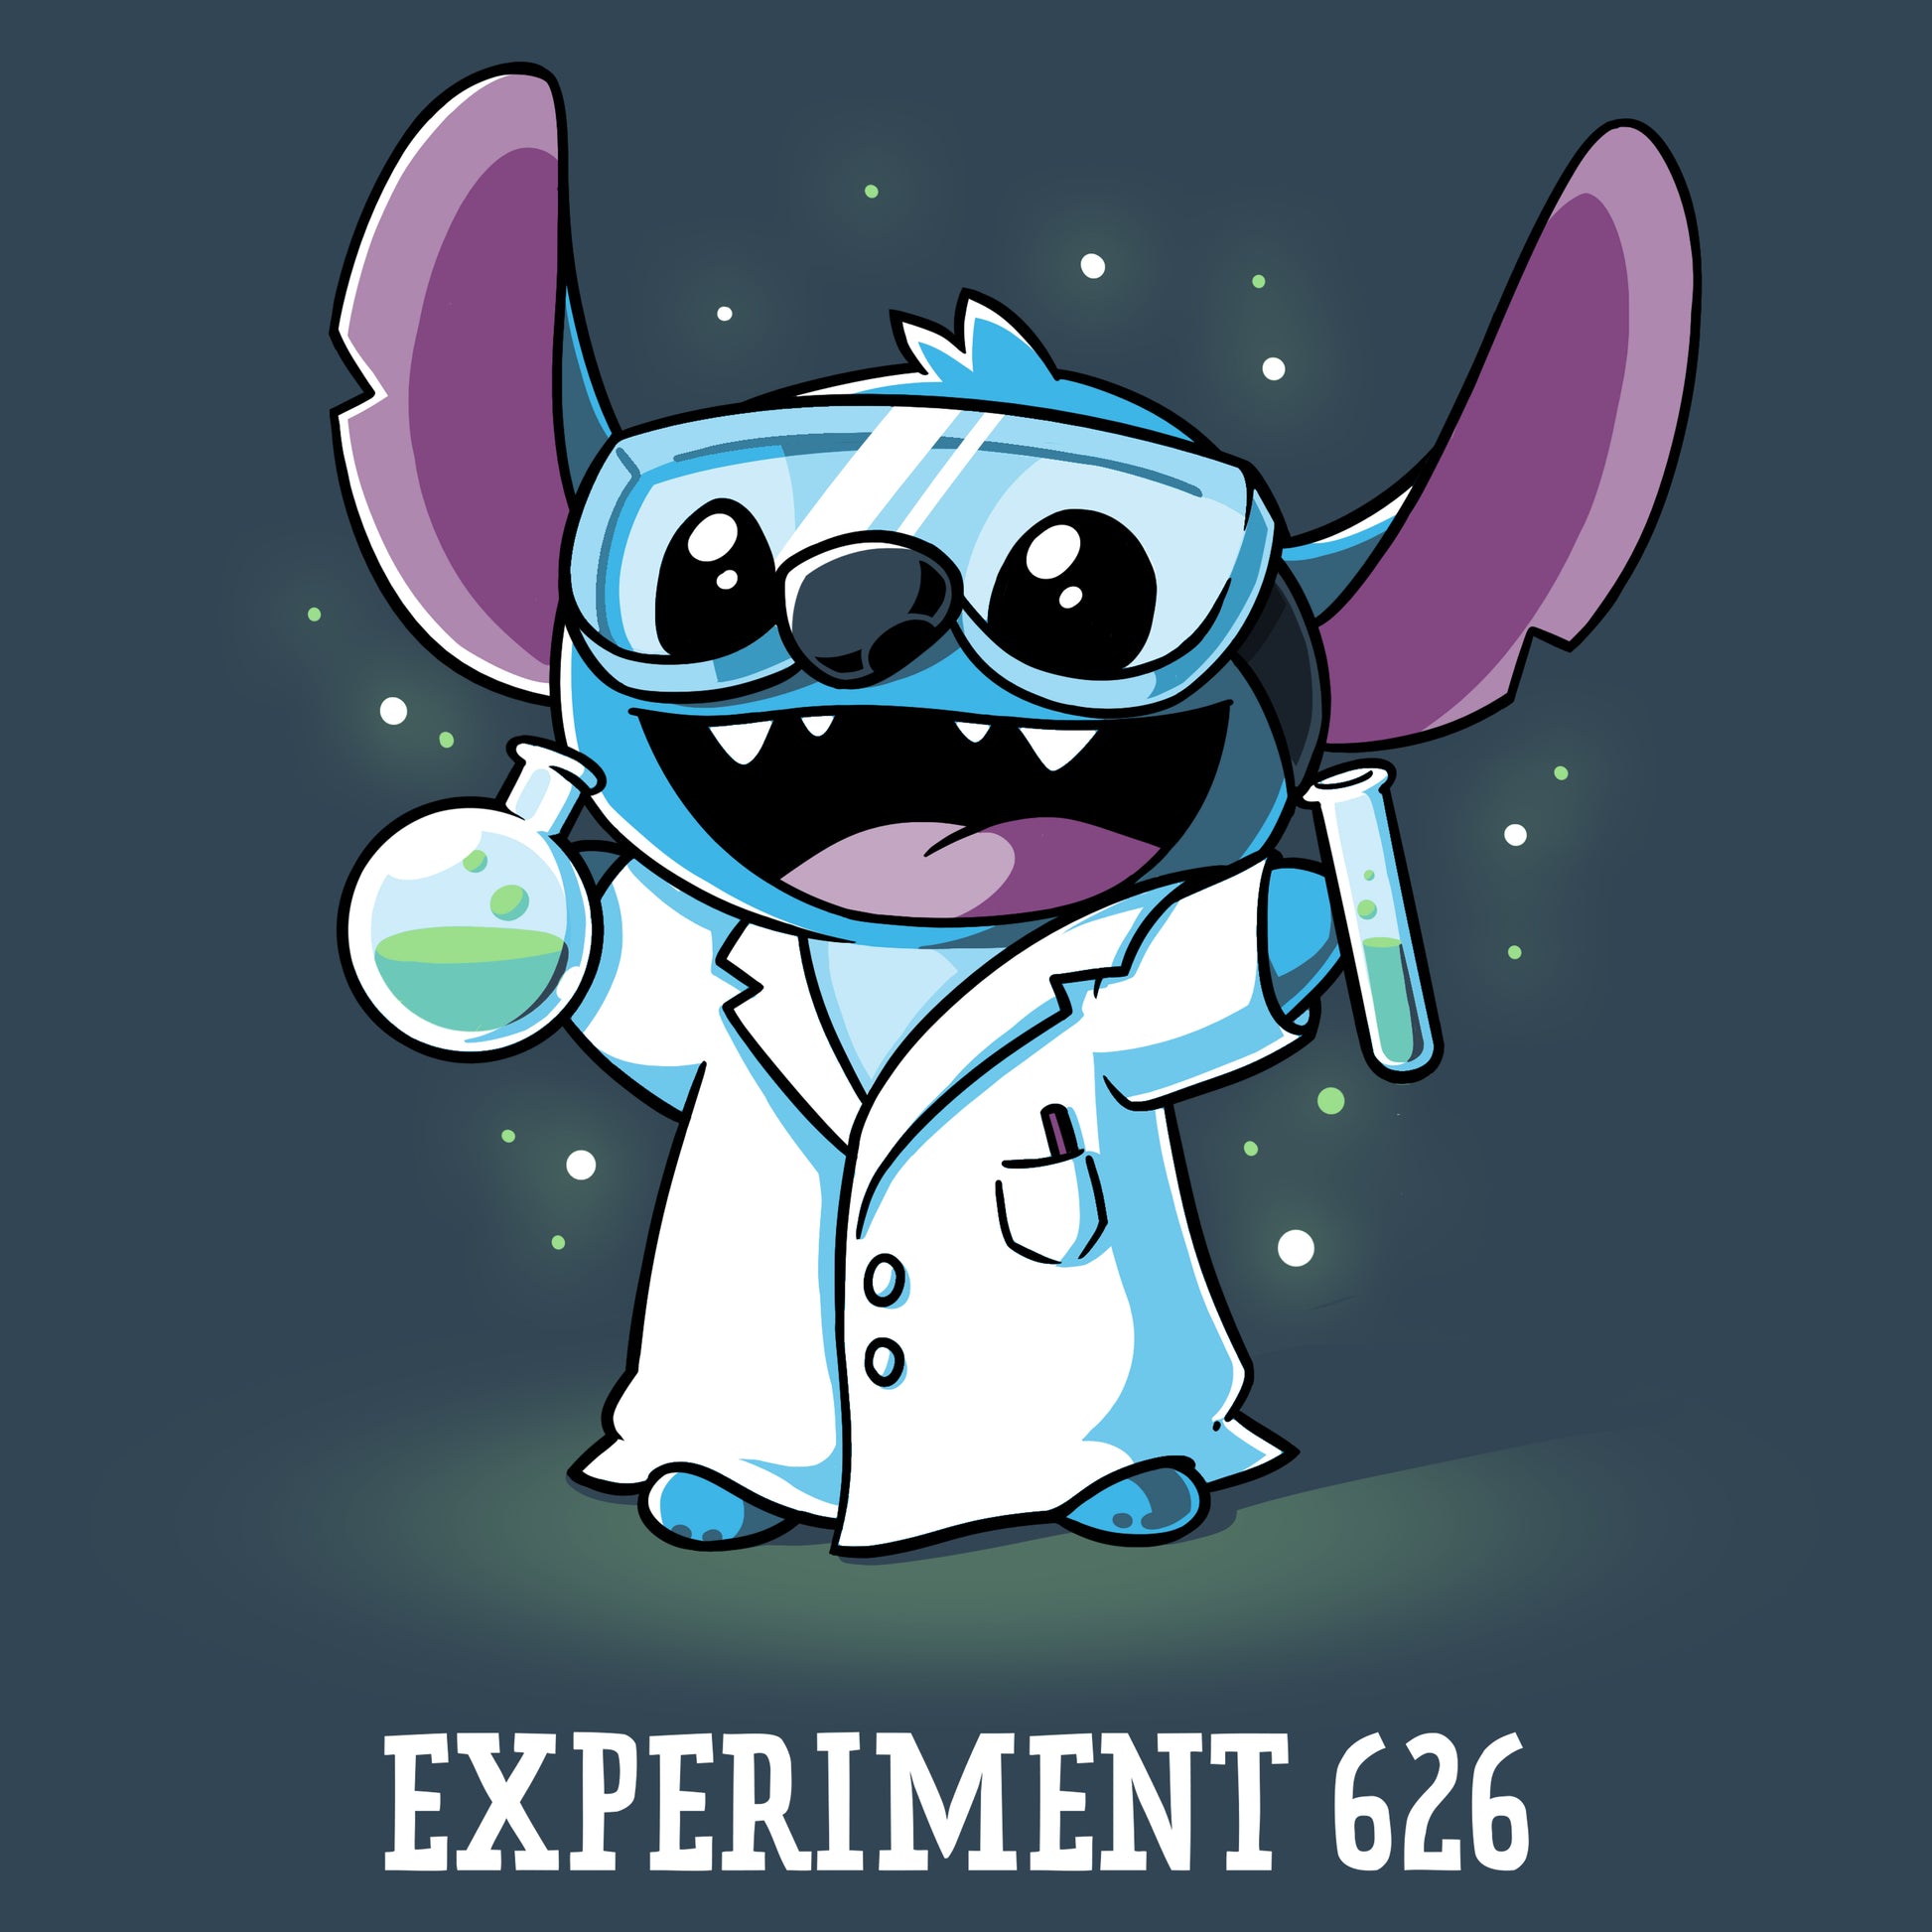 Officially Licensed Disney Stitch Experiment 626 t-shirt.